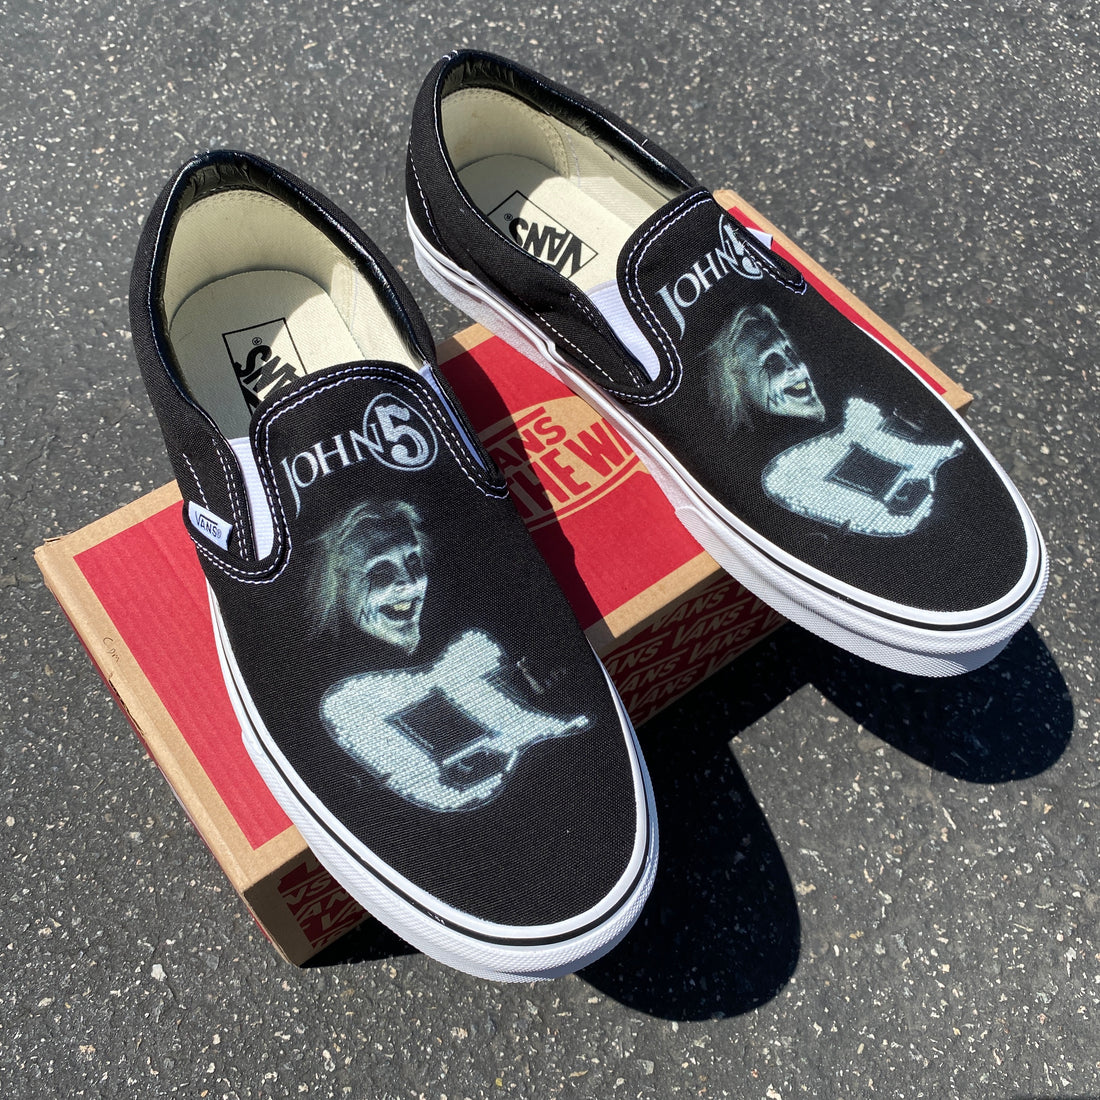 John 5 and the Creatures Slip On Vans - Custom Music Album Cover Shoes